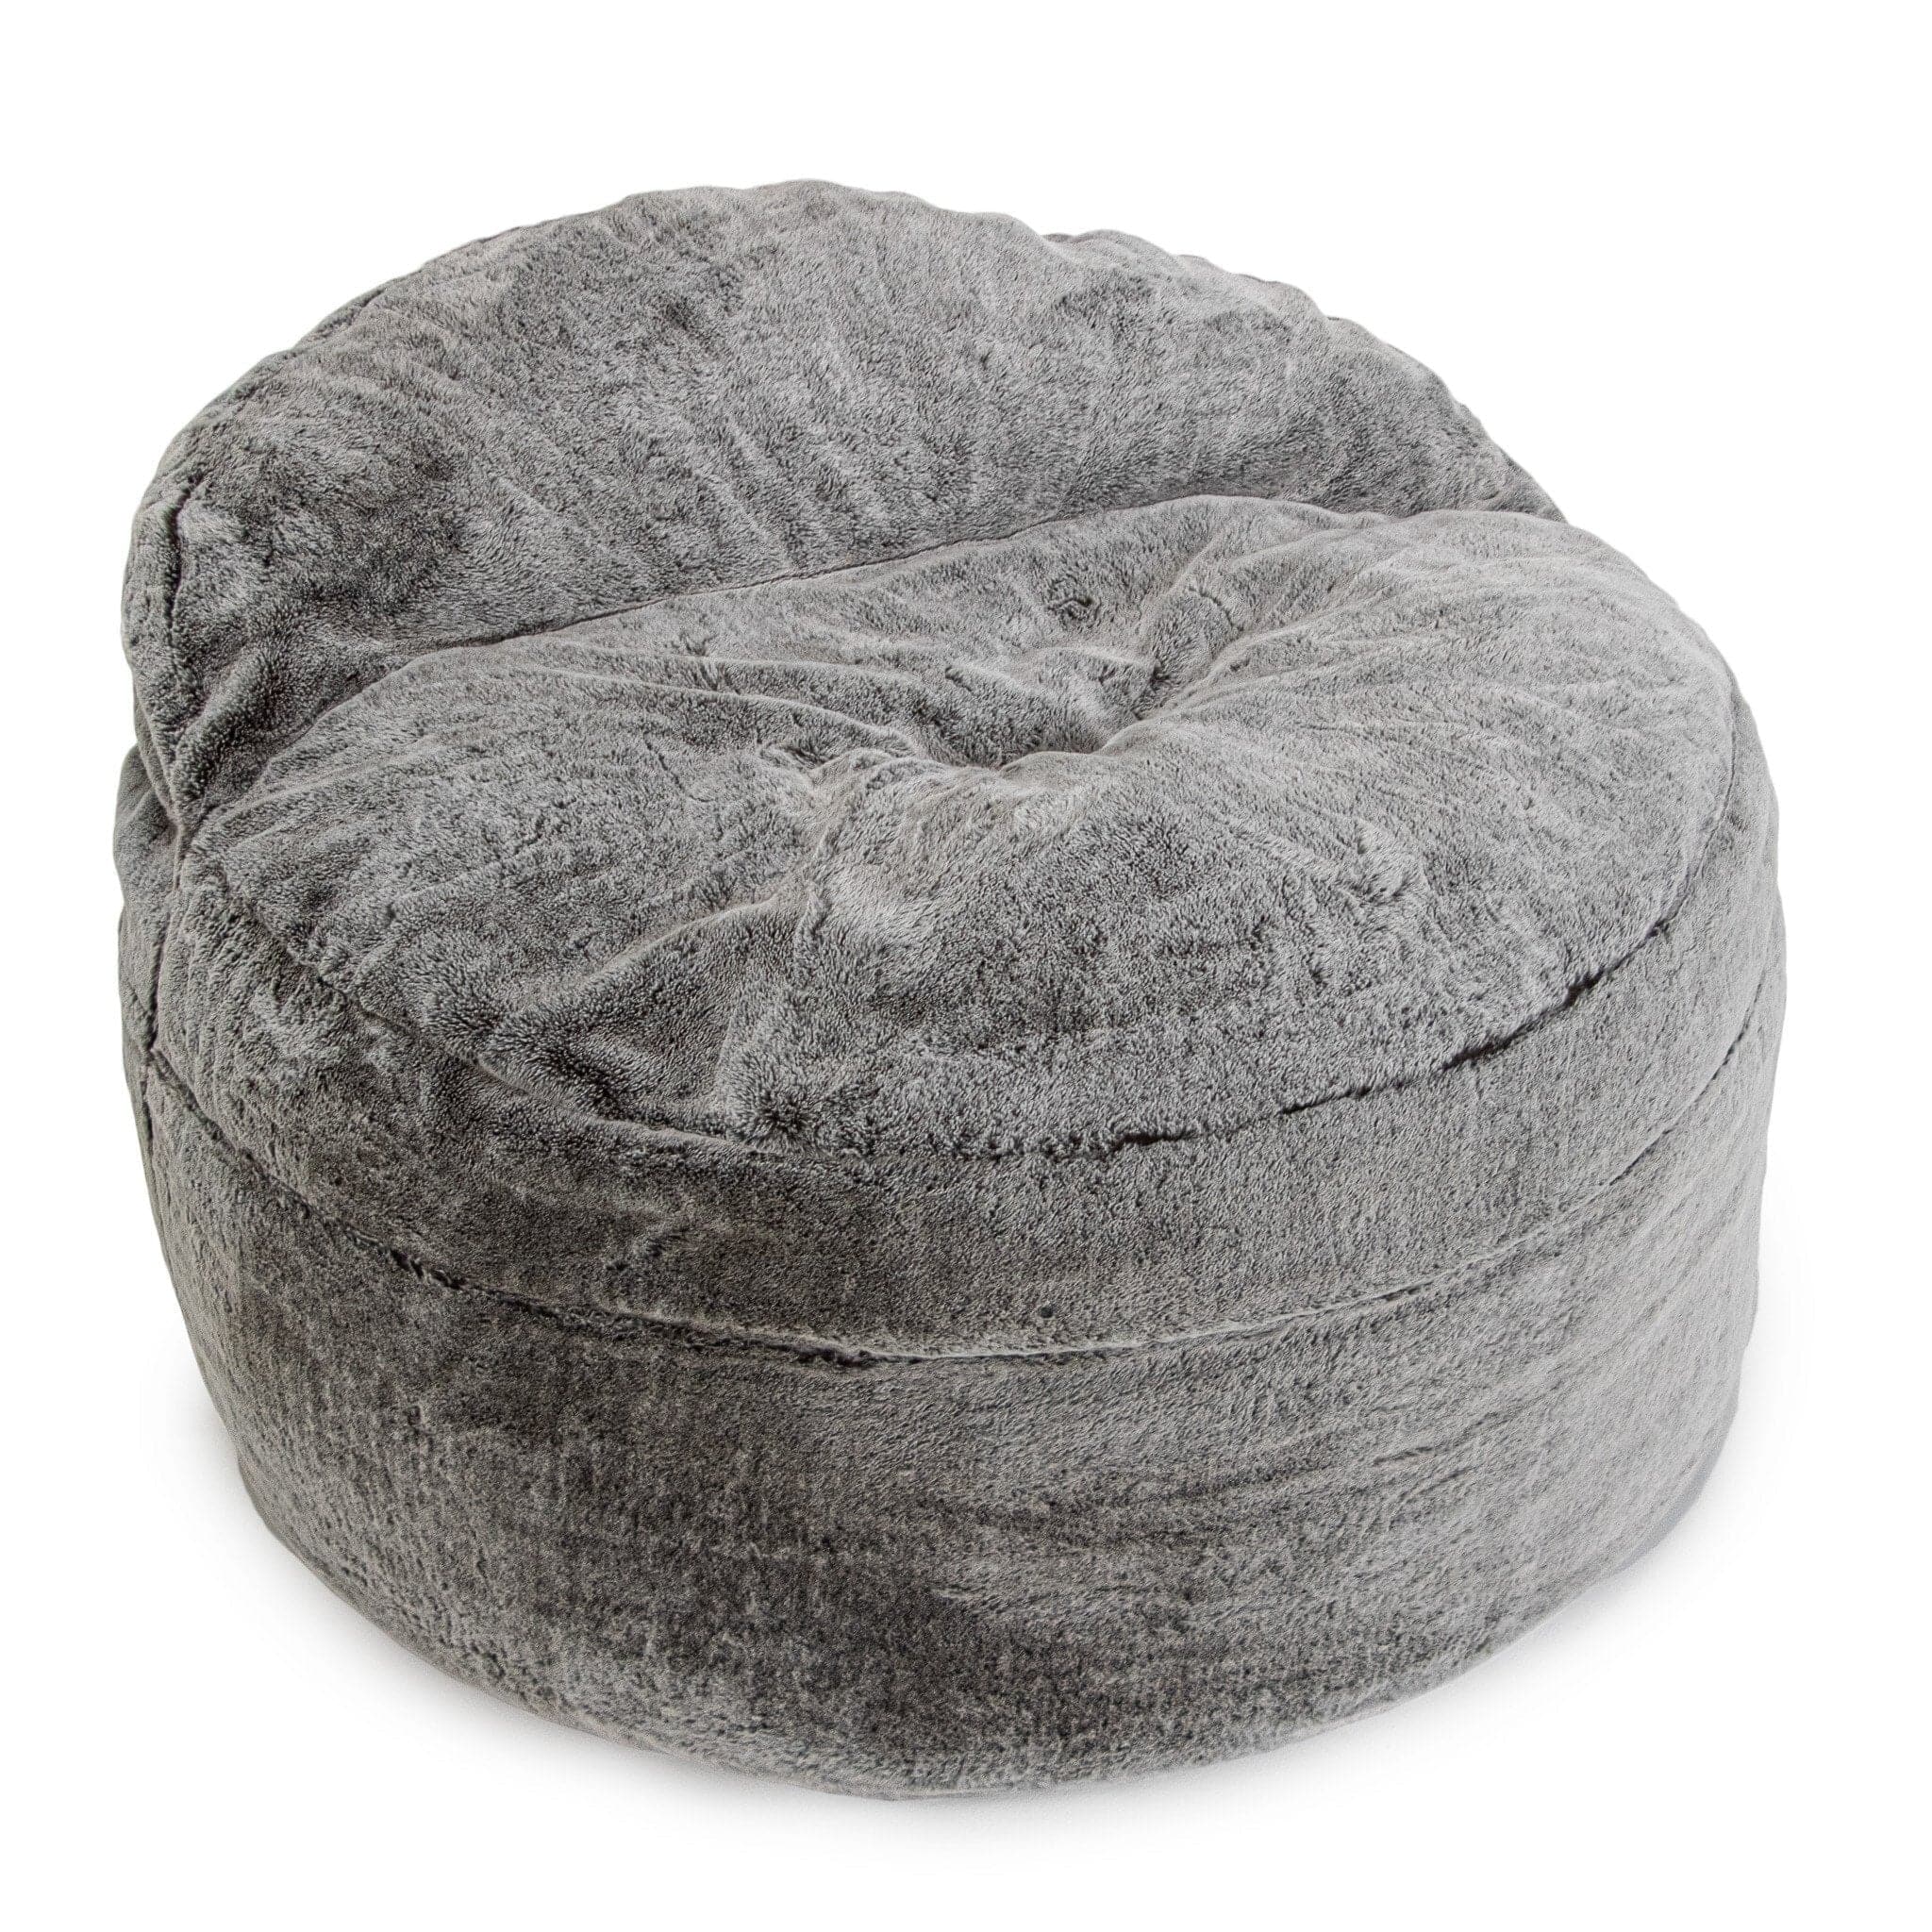 How to refill your deflated pouf or beanbag - Love Your Abode